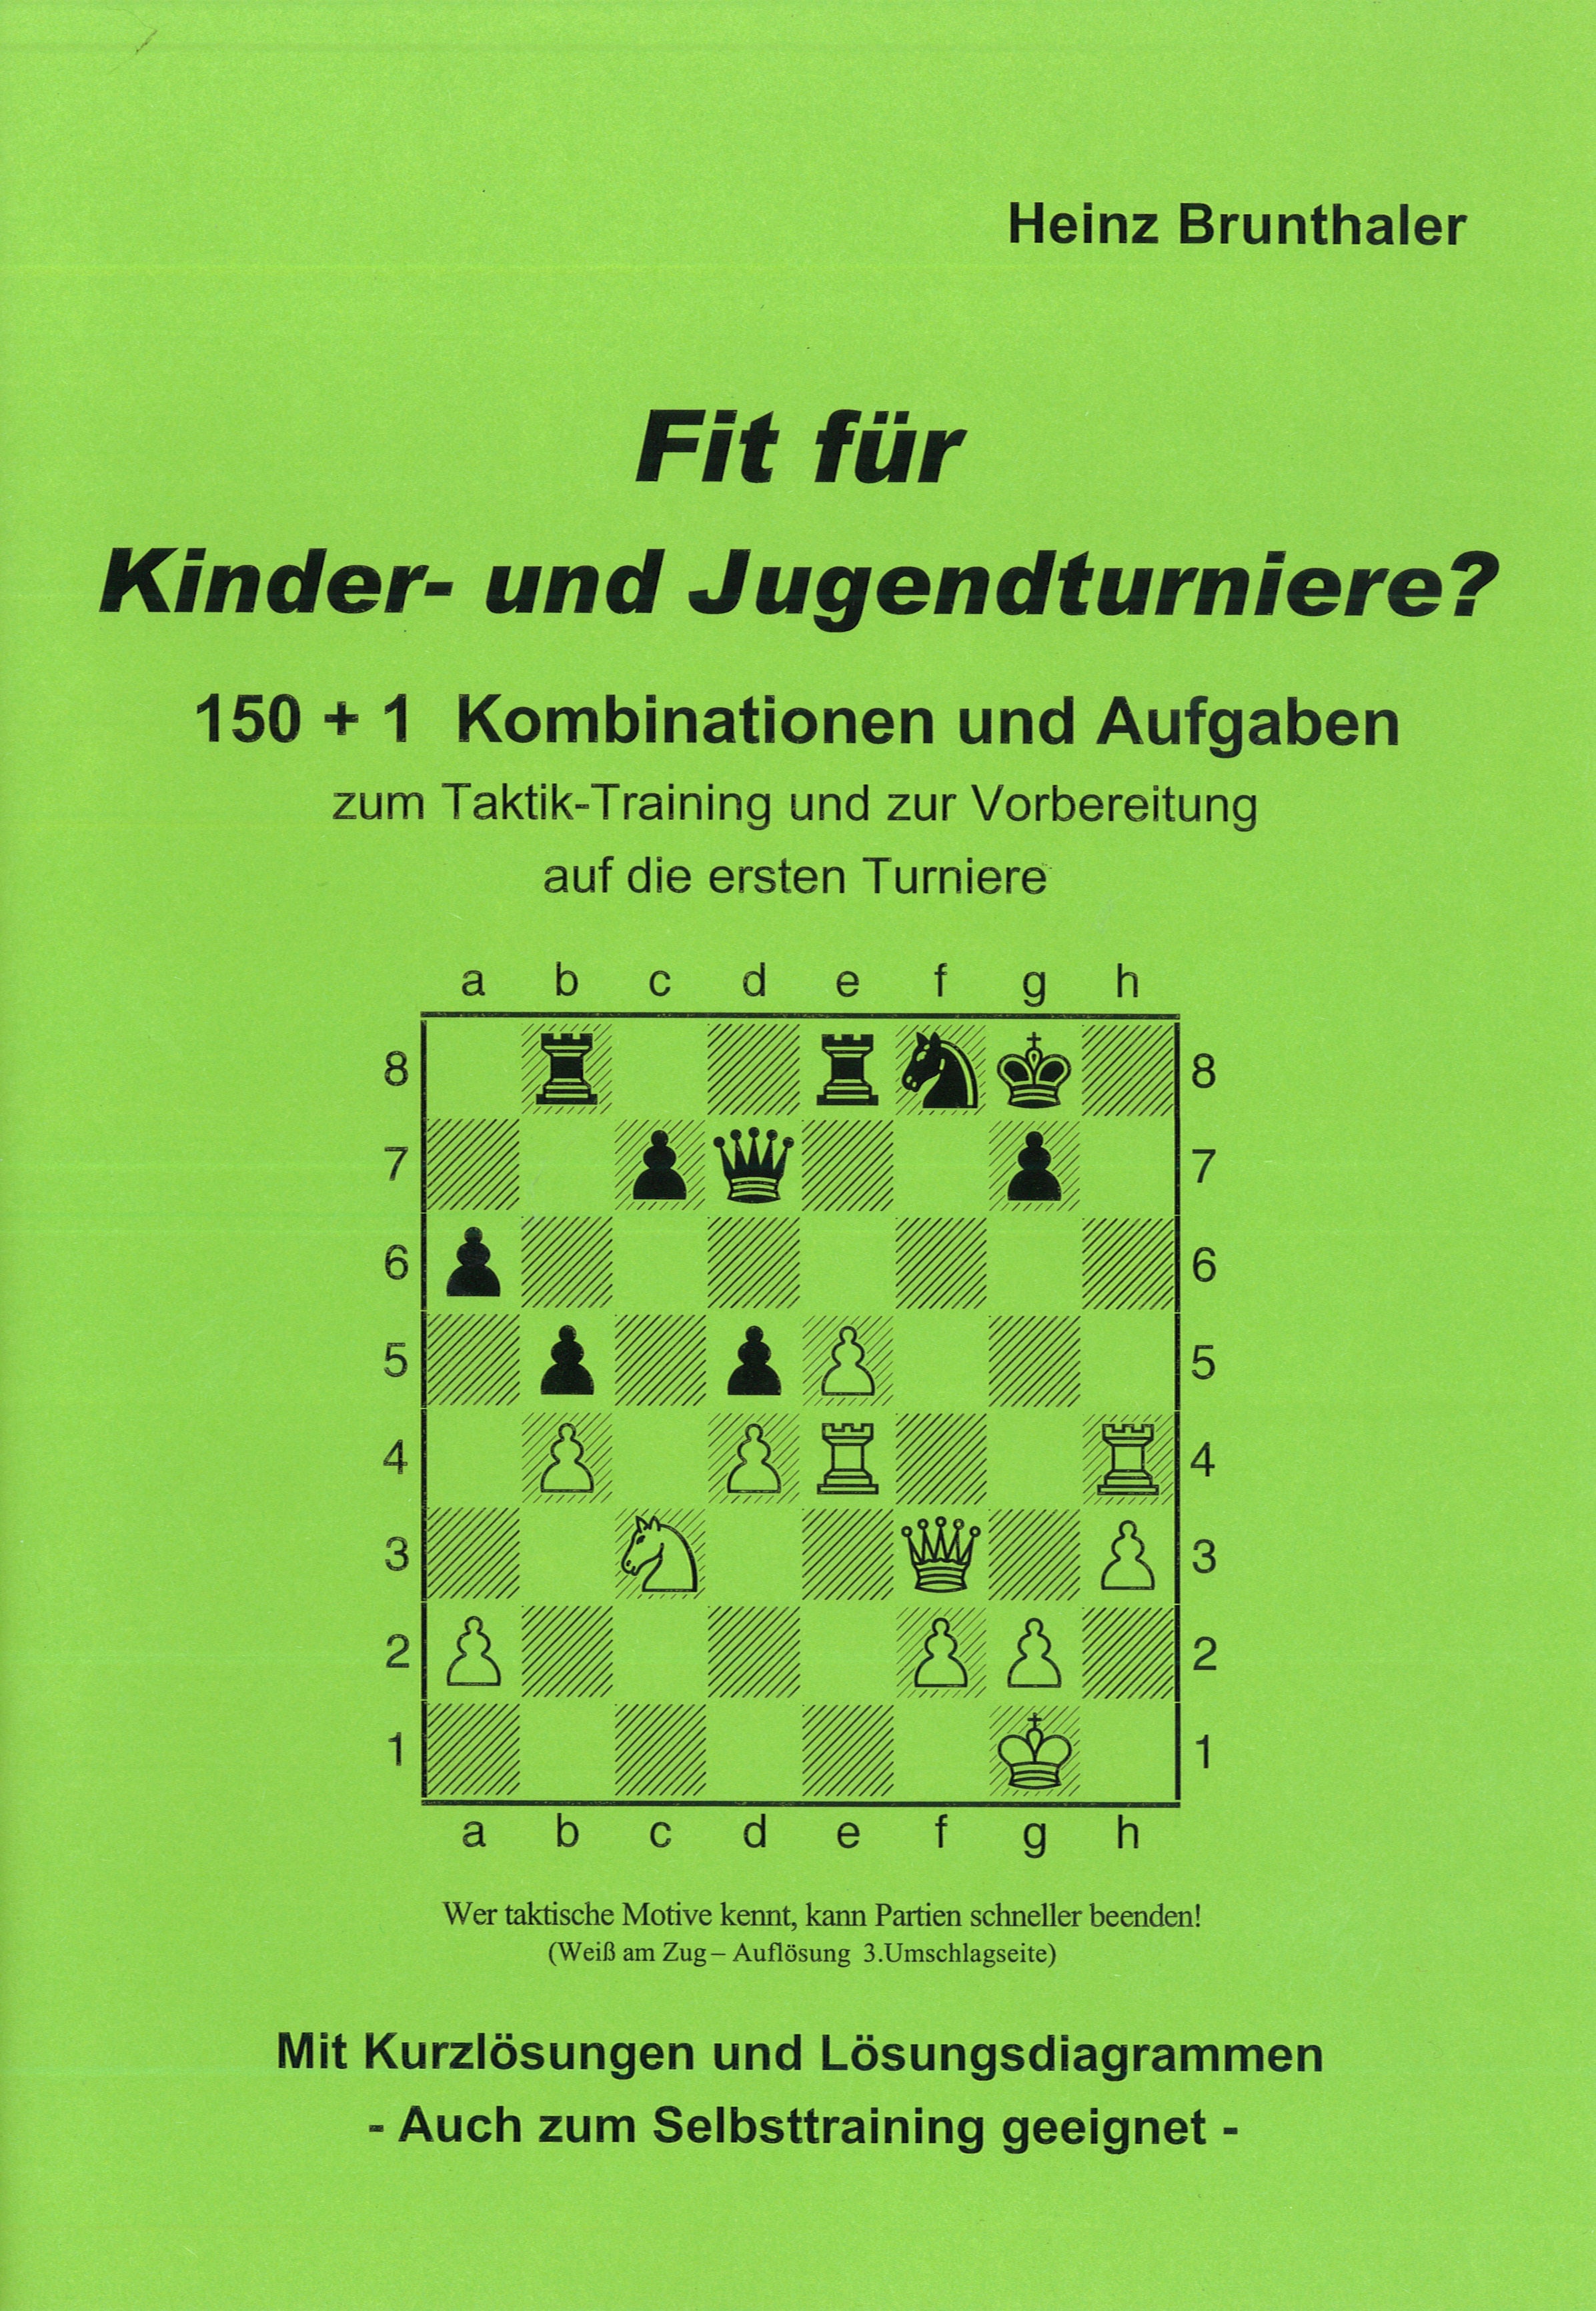 Brunthaler: Fit for children and youth tournaments?